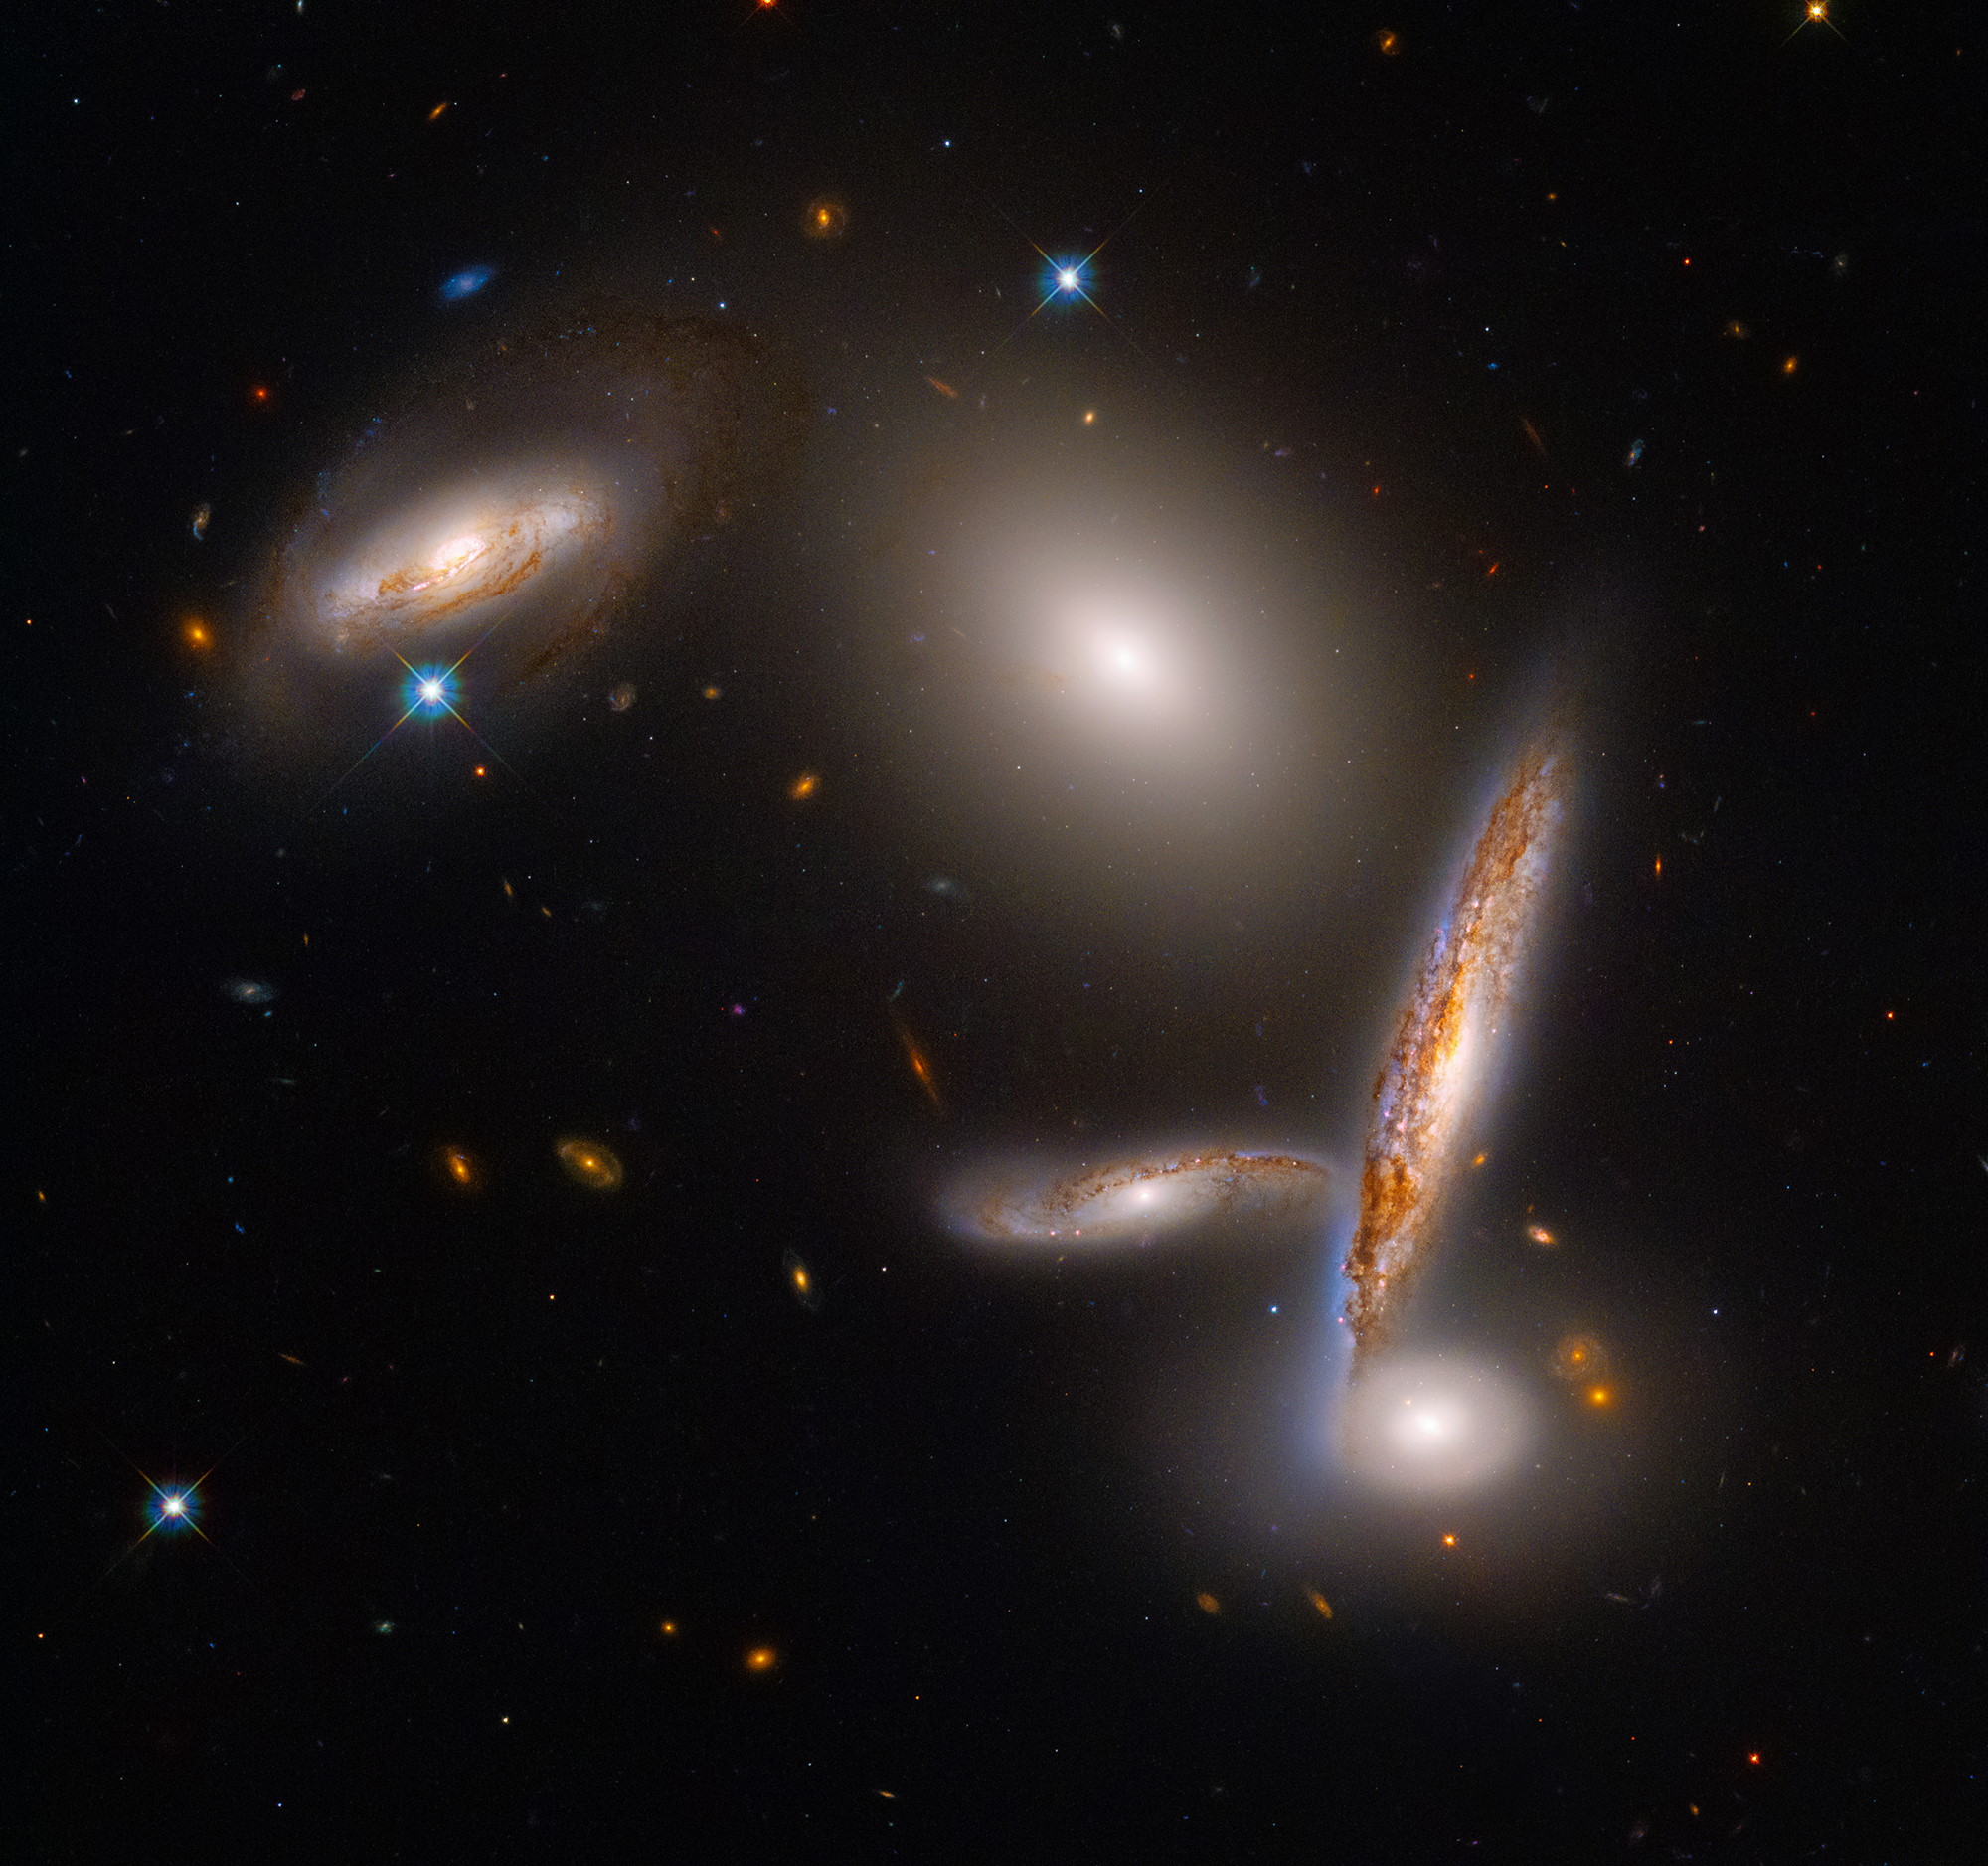 Hickson Compact Group 40 galaxies